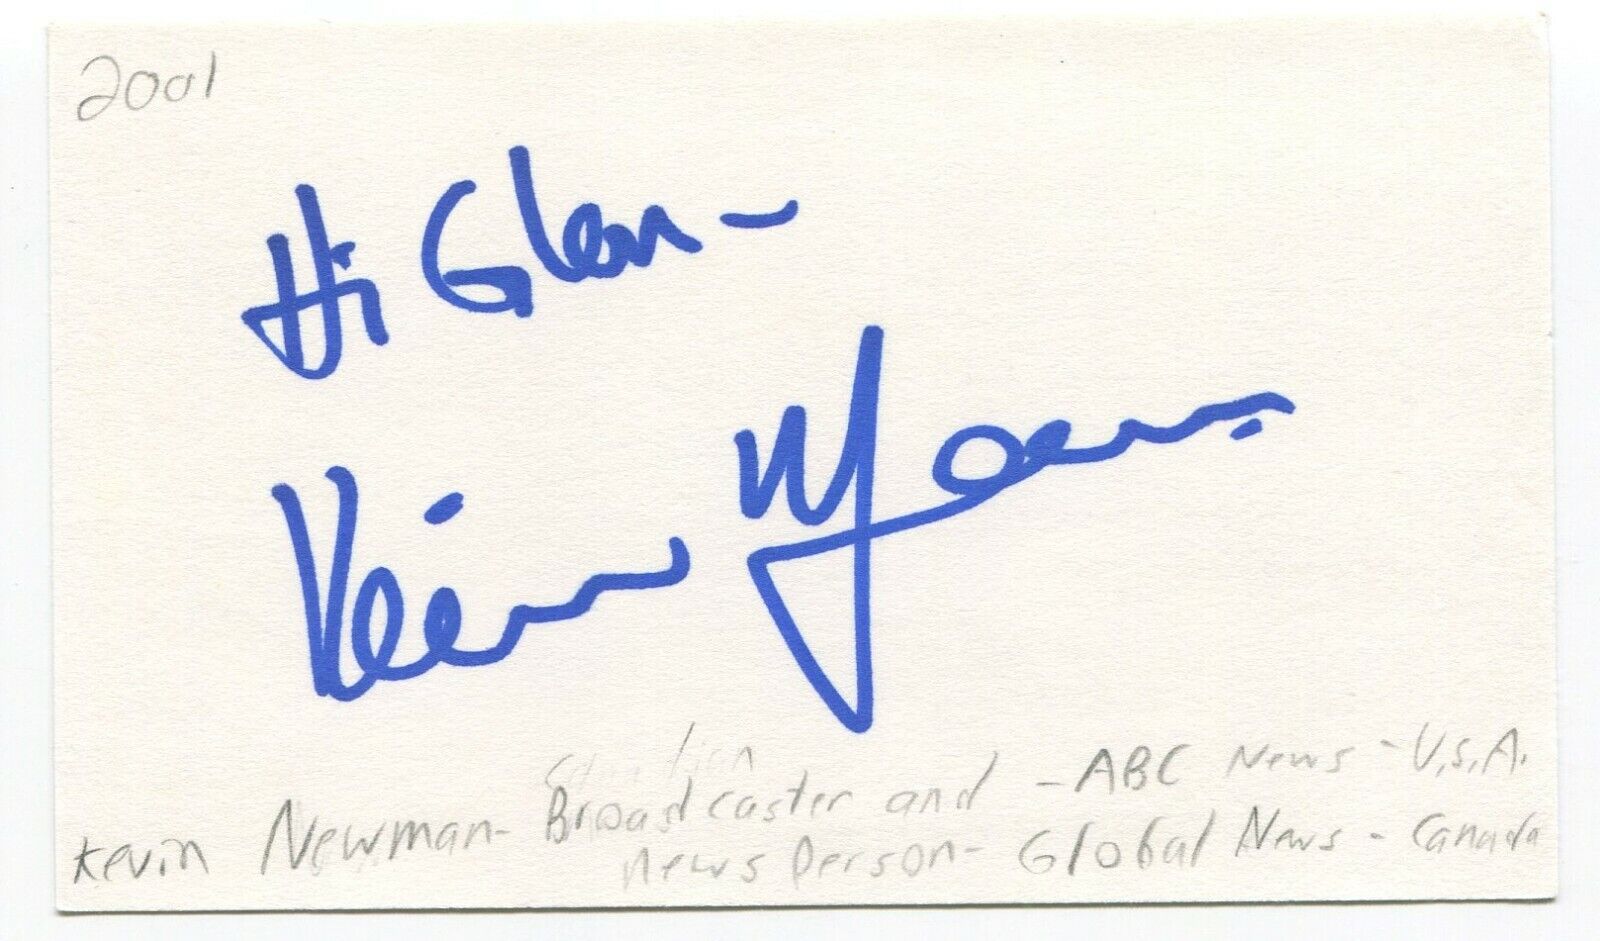 Kevin Newman Signed 3x5 Index Card Autographed Signature Journalist Broadcaster